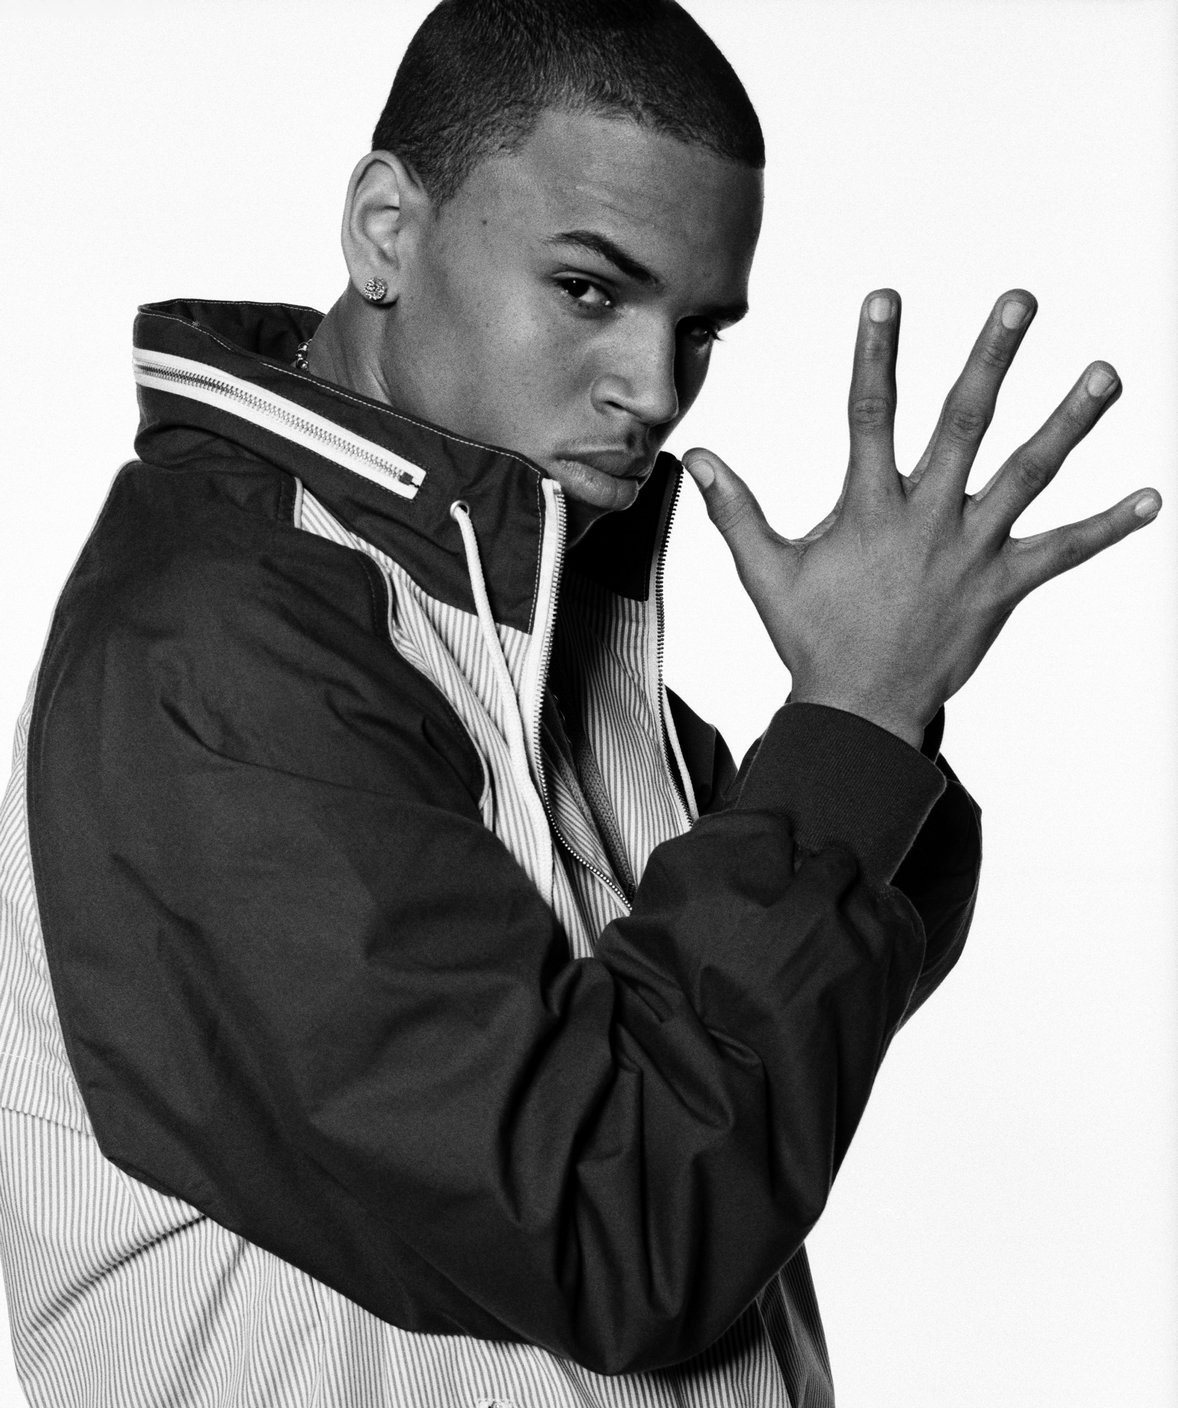 Chris Brown Profile and Photos 2012 | Hollywood Stars1178 x 1408